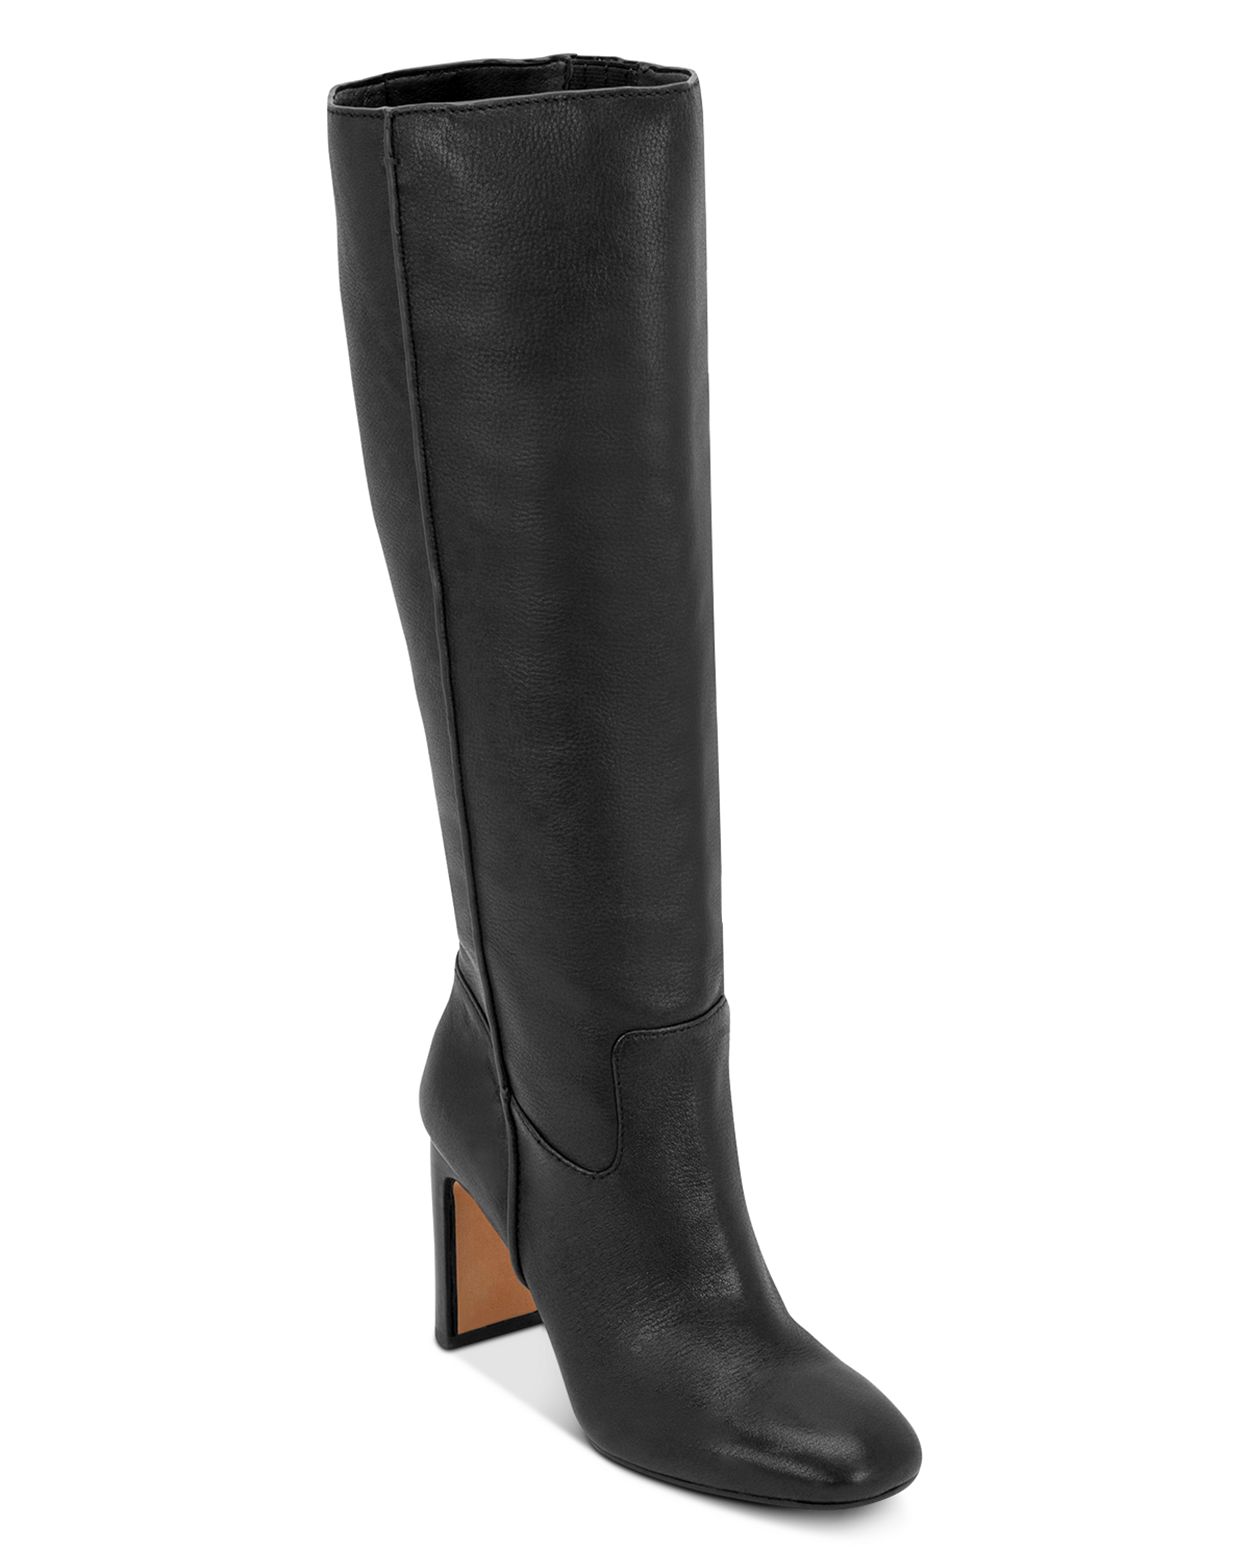 woocommerce-673321-2209615.cloudwaysapps.com-dolce-vita-womens-black-leather-davey-knee-high-boots